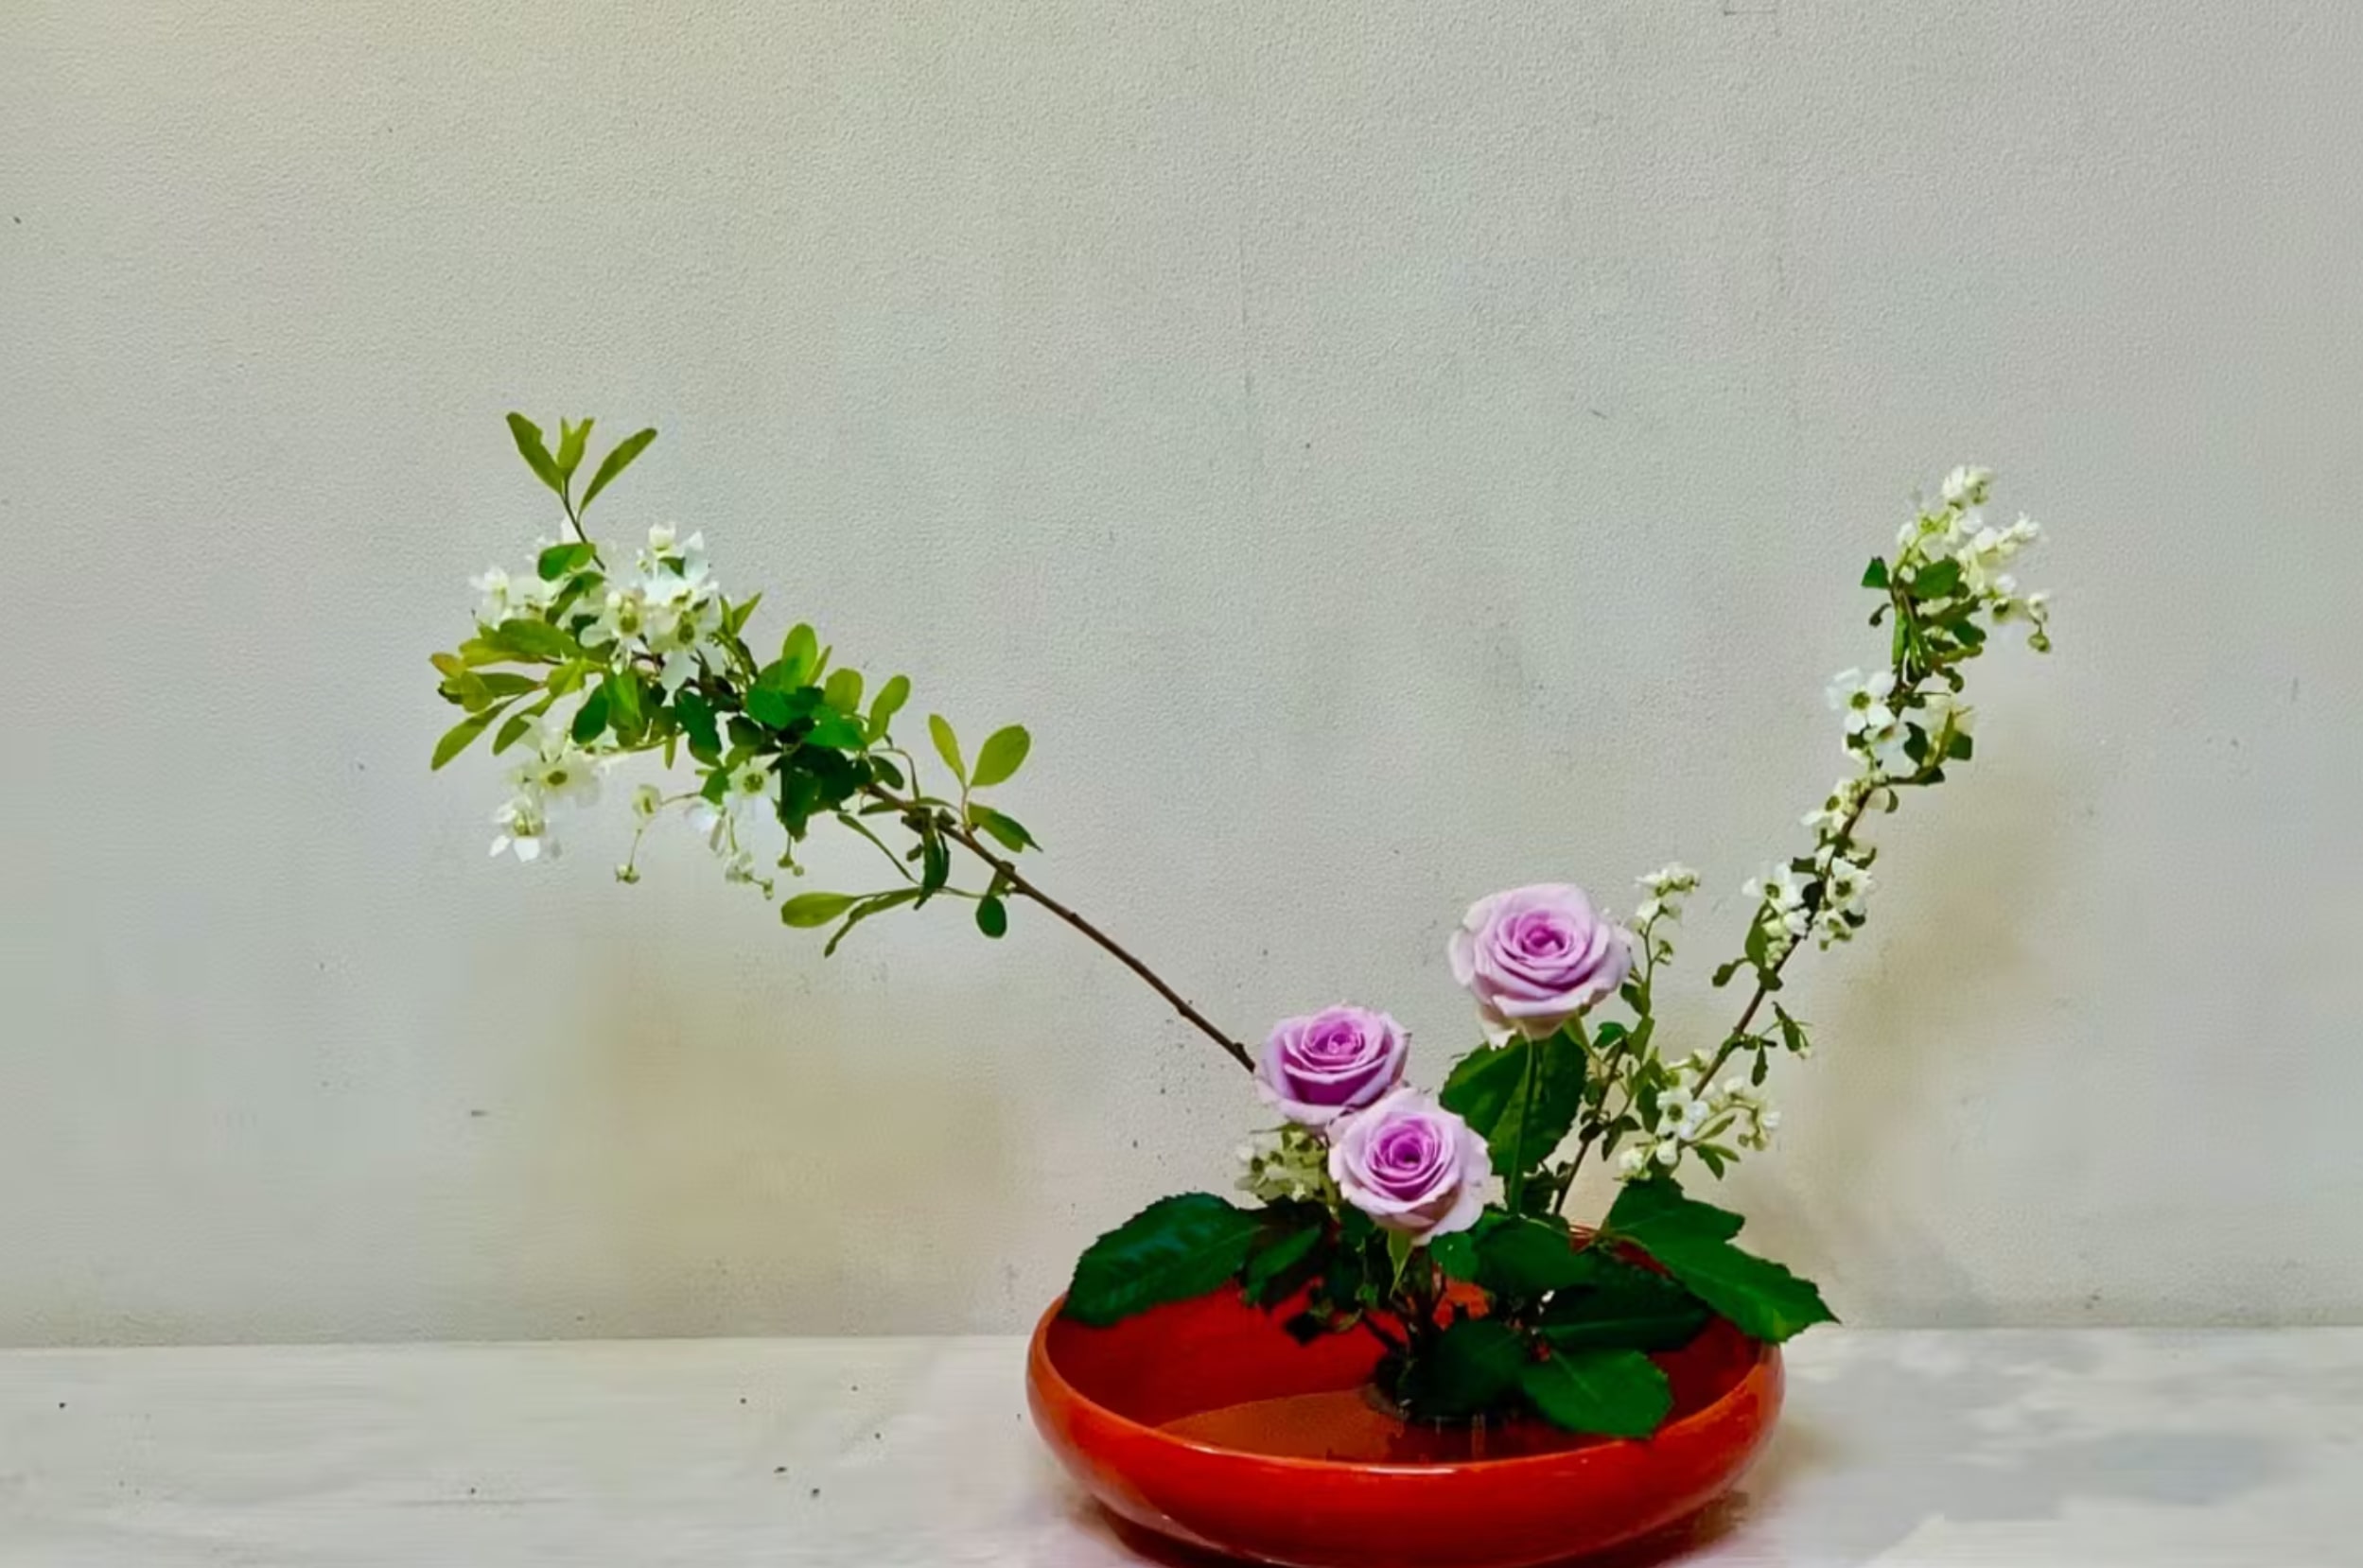 Flower Arranging Experience in Tokyo